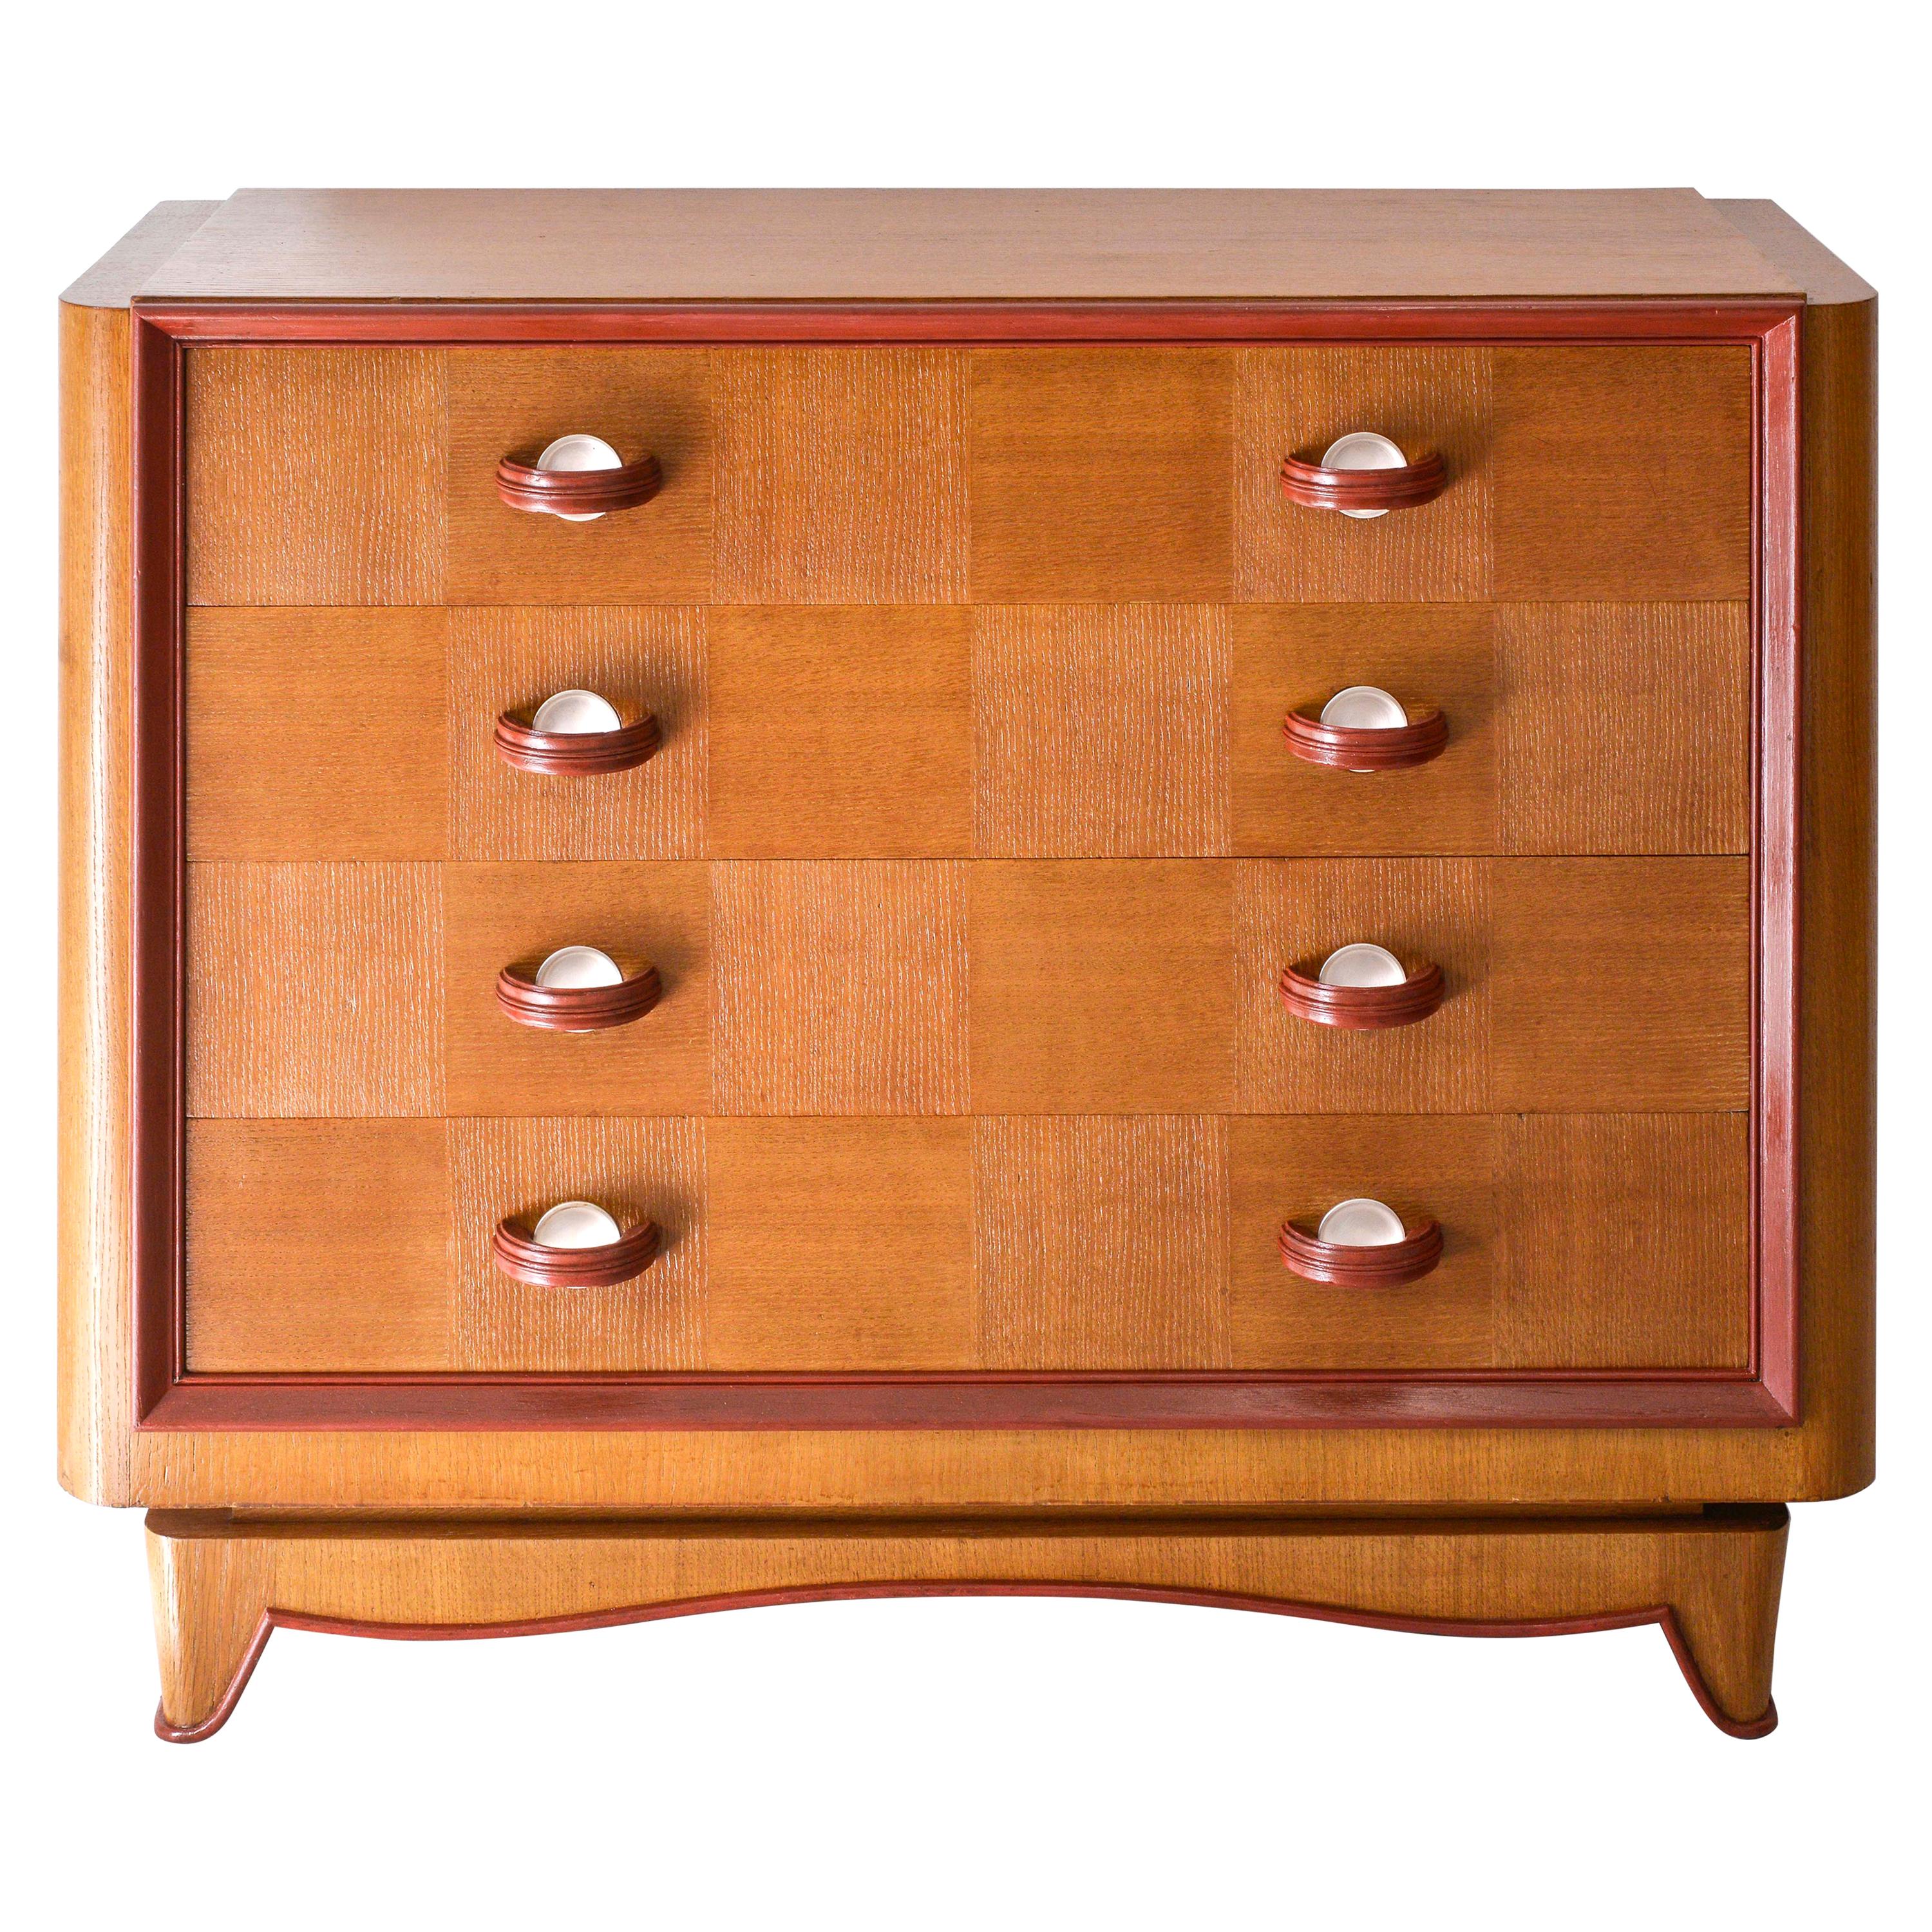 Rectangular top over four drawers fitted with original bronze (silver leaf) and wood handles; on elegant molded tapering base. Hermes red lines to highlight the elegant curves of this original vintage case piece in perfect condition. This cabinet